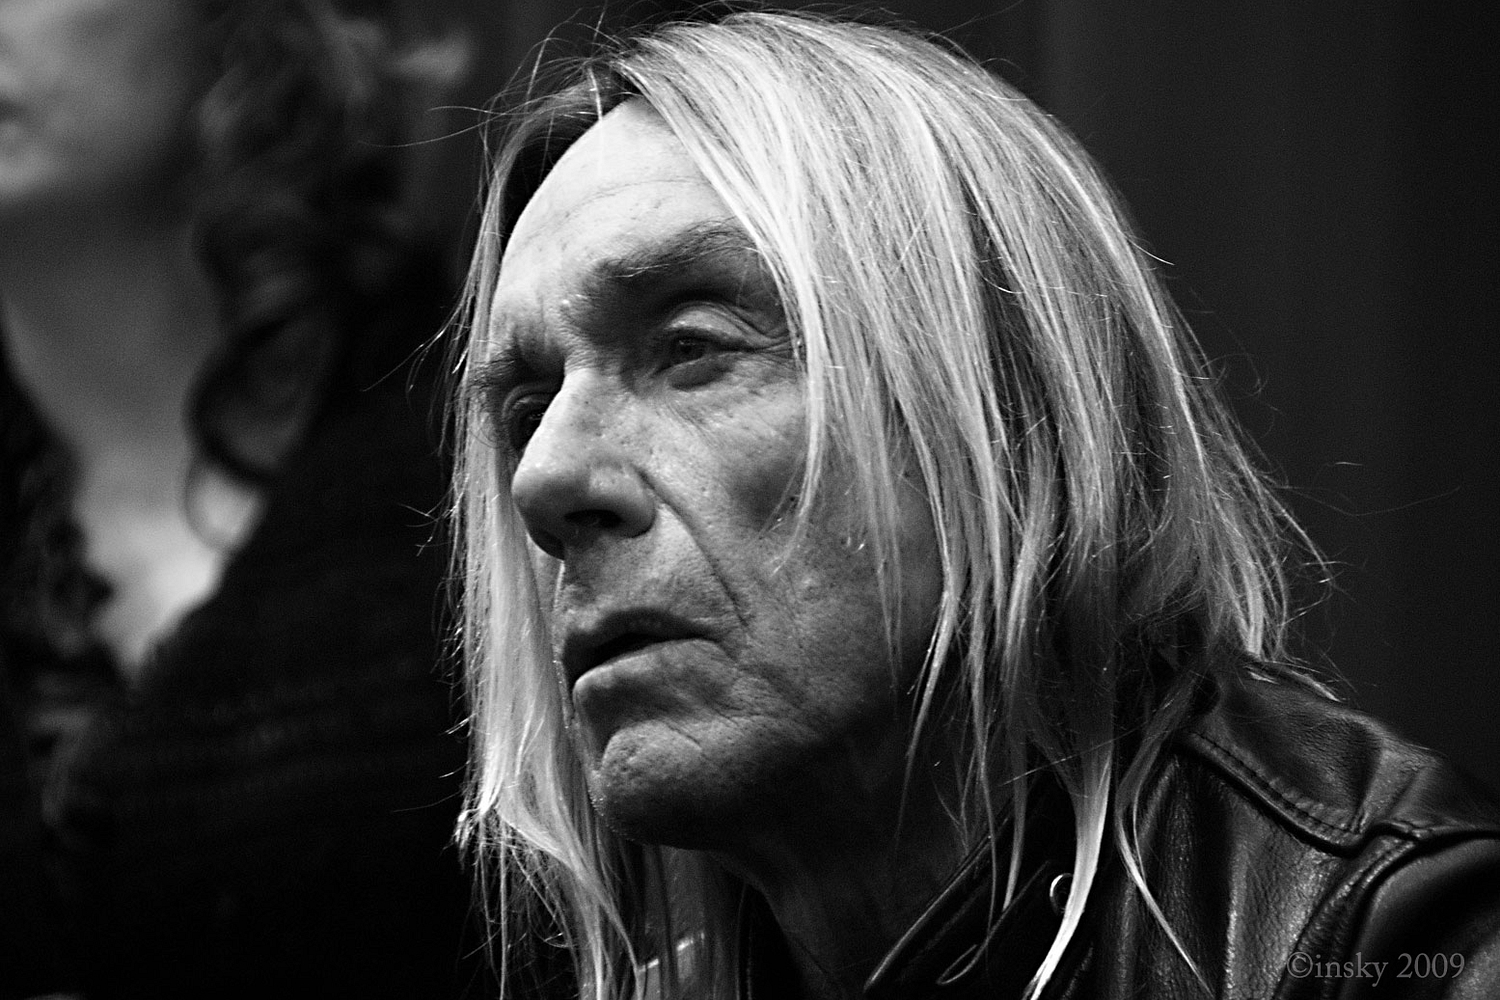 Iggy Pop, Buzzcocks, Adam Ant, The Damned to play Isle of Wight Festival